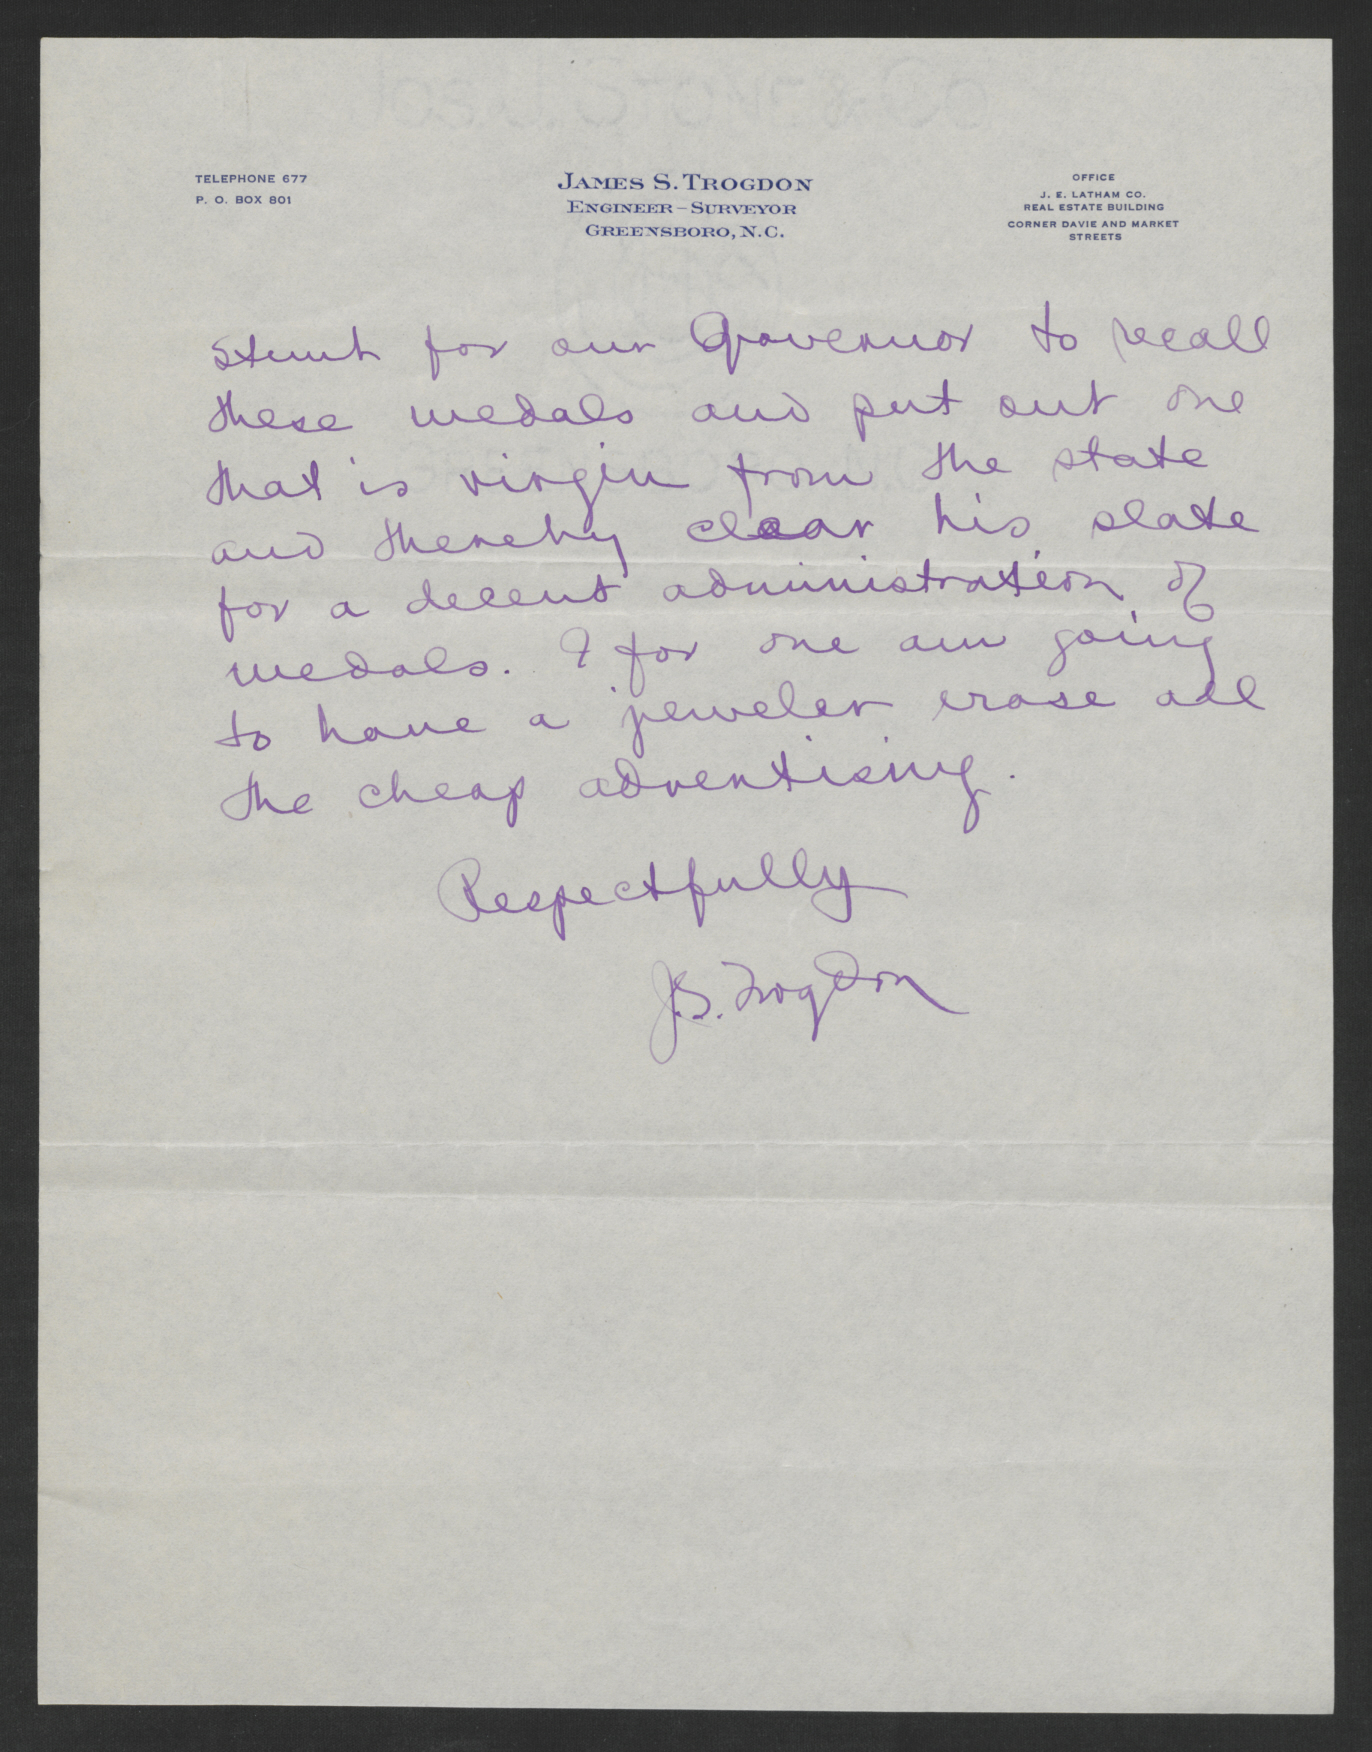 Letter from James S. Trogden to Thomas W. Bickett, December 13, 1920, page 2